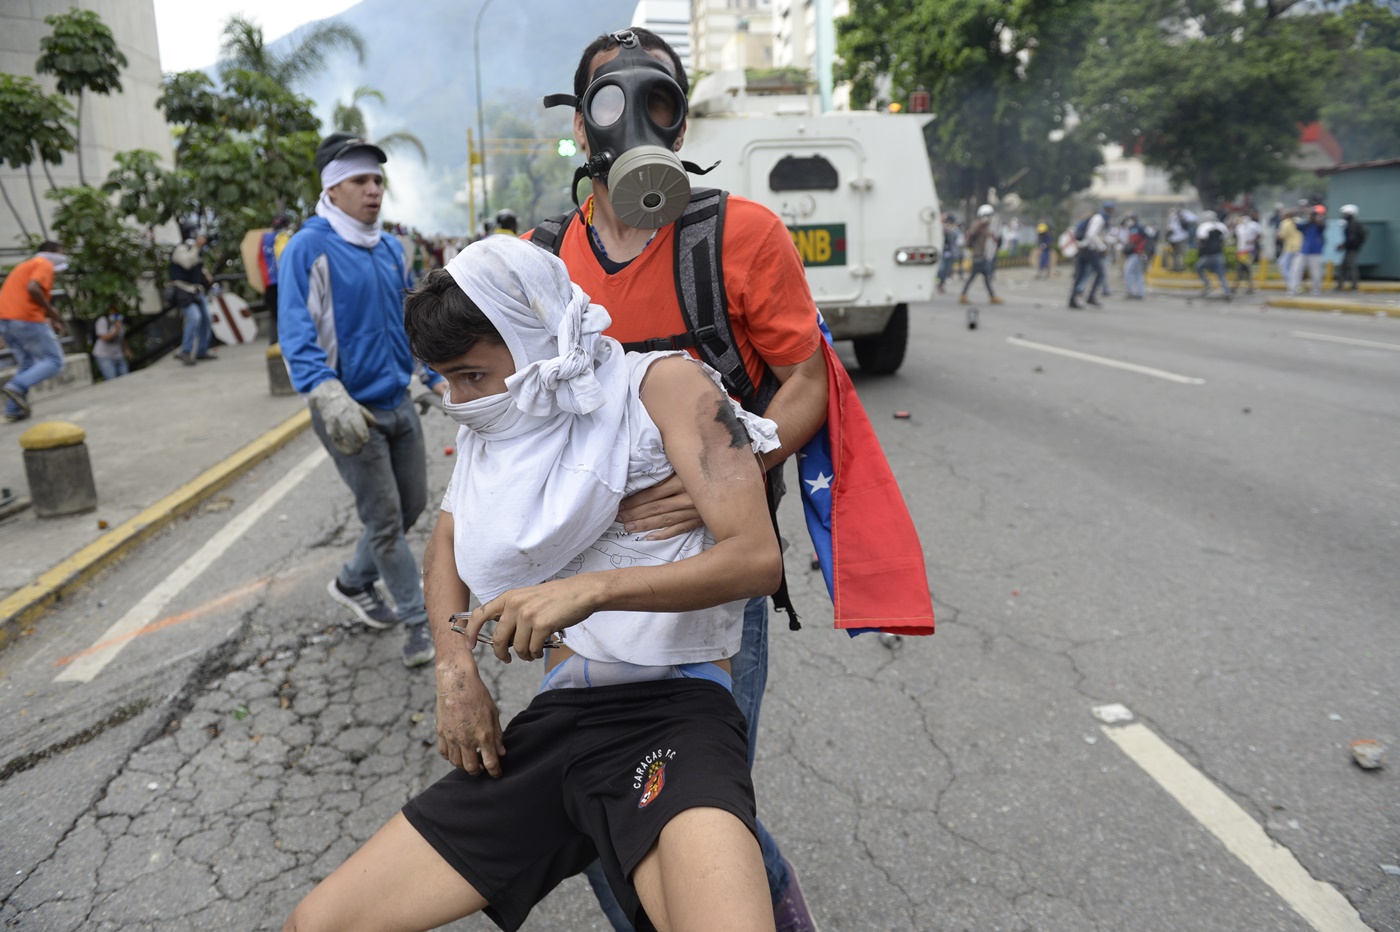 An opposition demonstrator ran over by a National Guard control vehicle is dragged away by a fellow demonstrator during a protest against Venezuelan President Nicolas Maduro, in Caracas on May 3, 2017. Venezuela's angry opposition rallied Wednesday vowing huge street protests against President Nicolas Maduro's plan to rewrite the constitution and accusing him of dodging elections to cling to power despite deadly unrest. / AFP PHOTO / FEDERICO PARRA